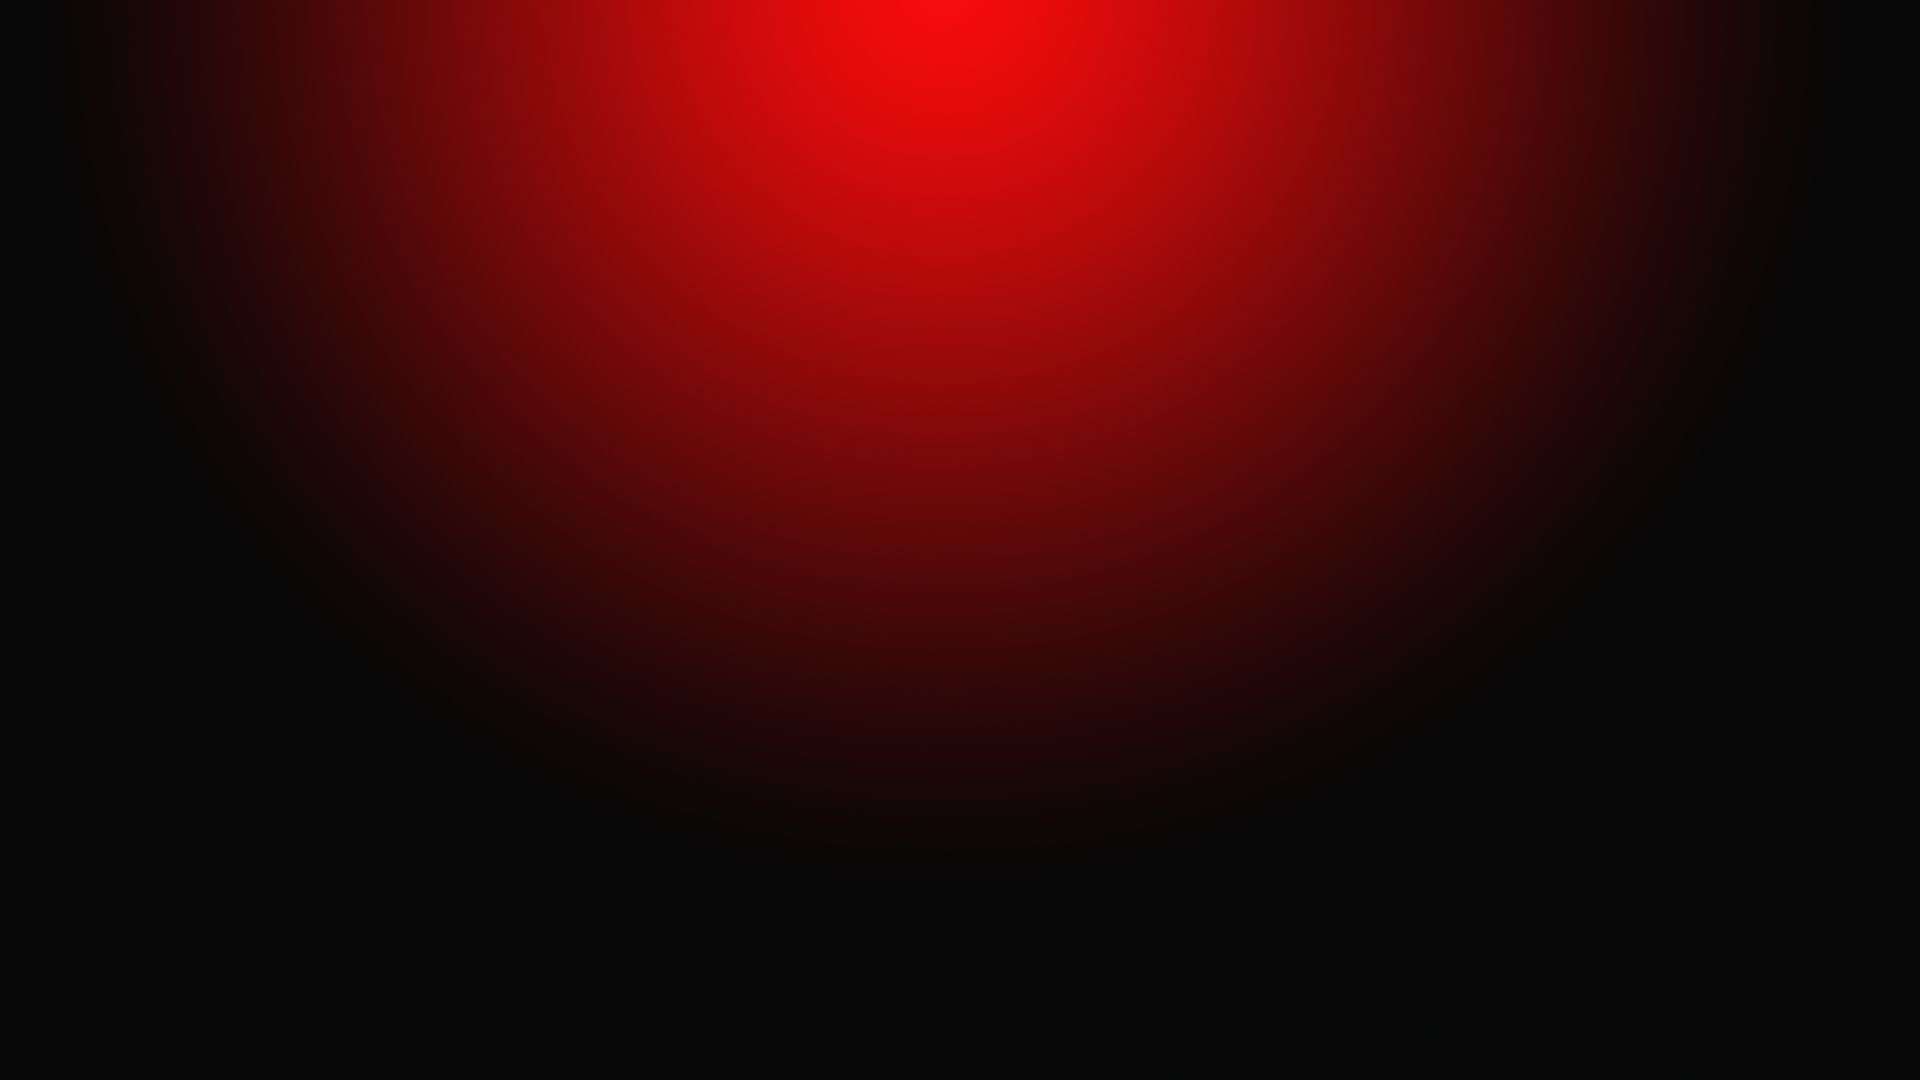 Nothing Found For Red And Black Vertical Circular Gradient